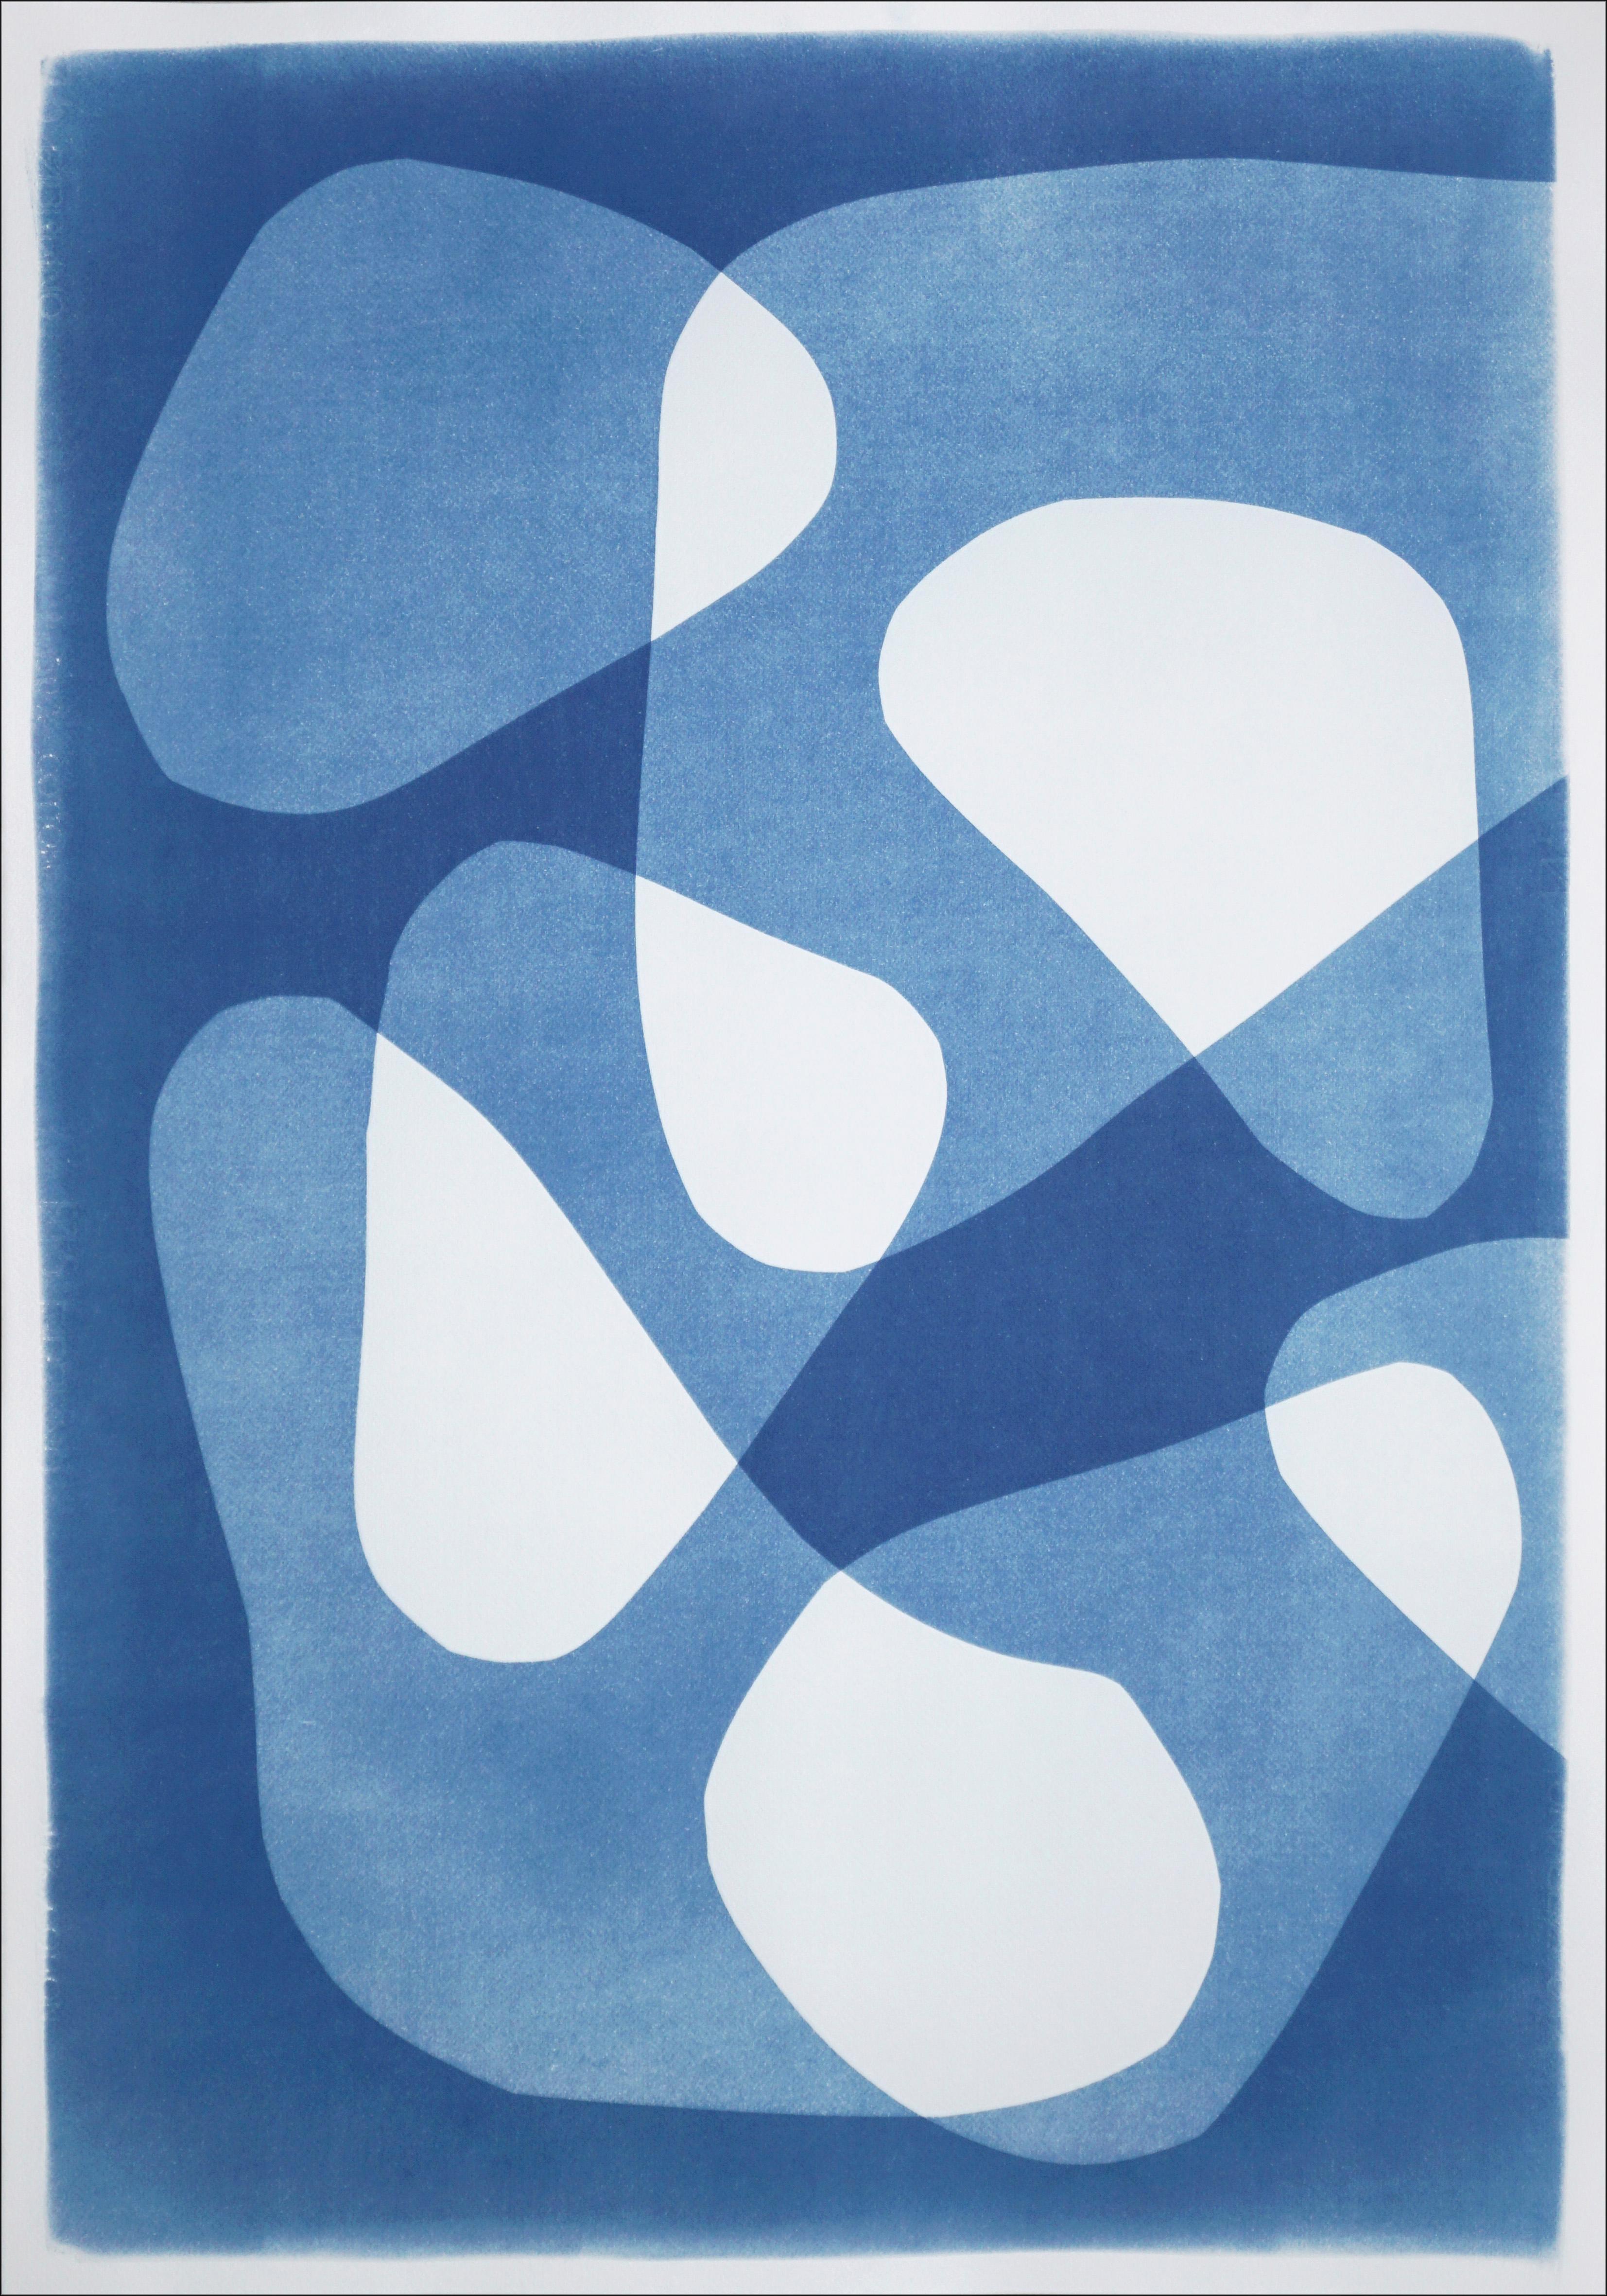 2022, Boomerangs in Movement, Large Diptych, Abstract Shapes in Blue, Monotype - Minimalist Print by Kind of Cyan